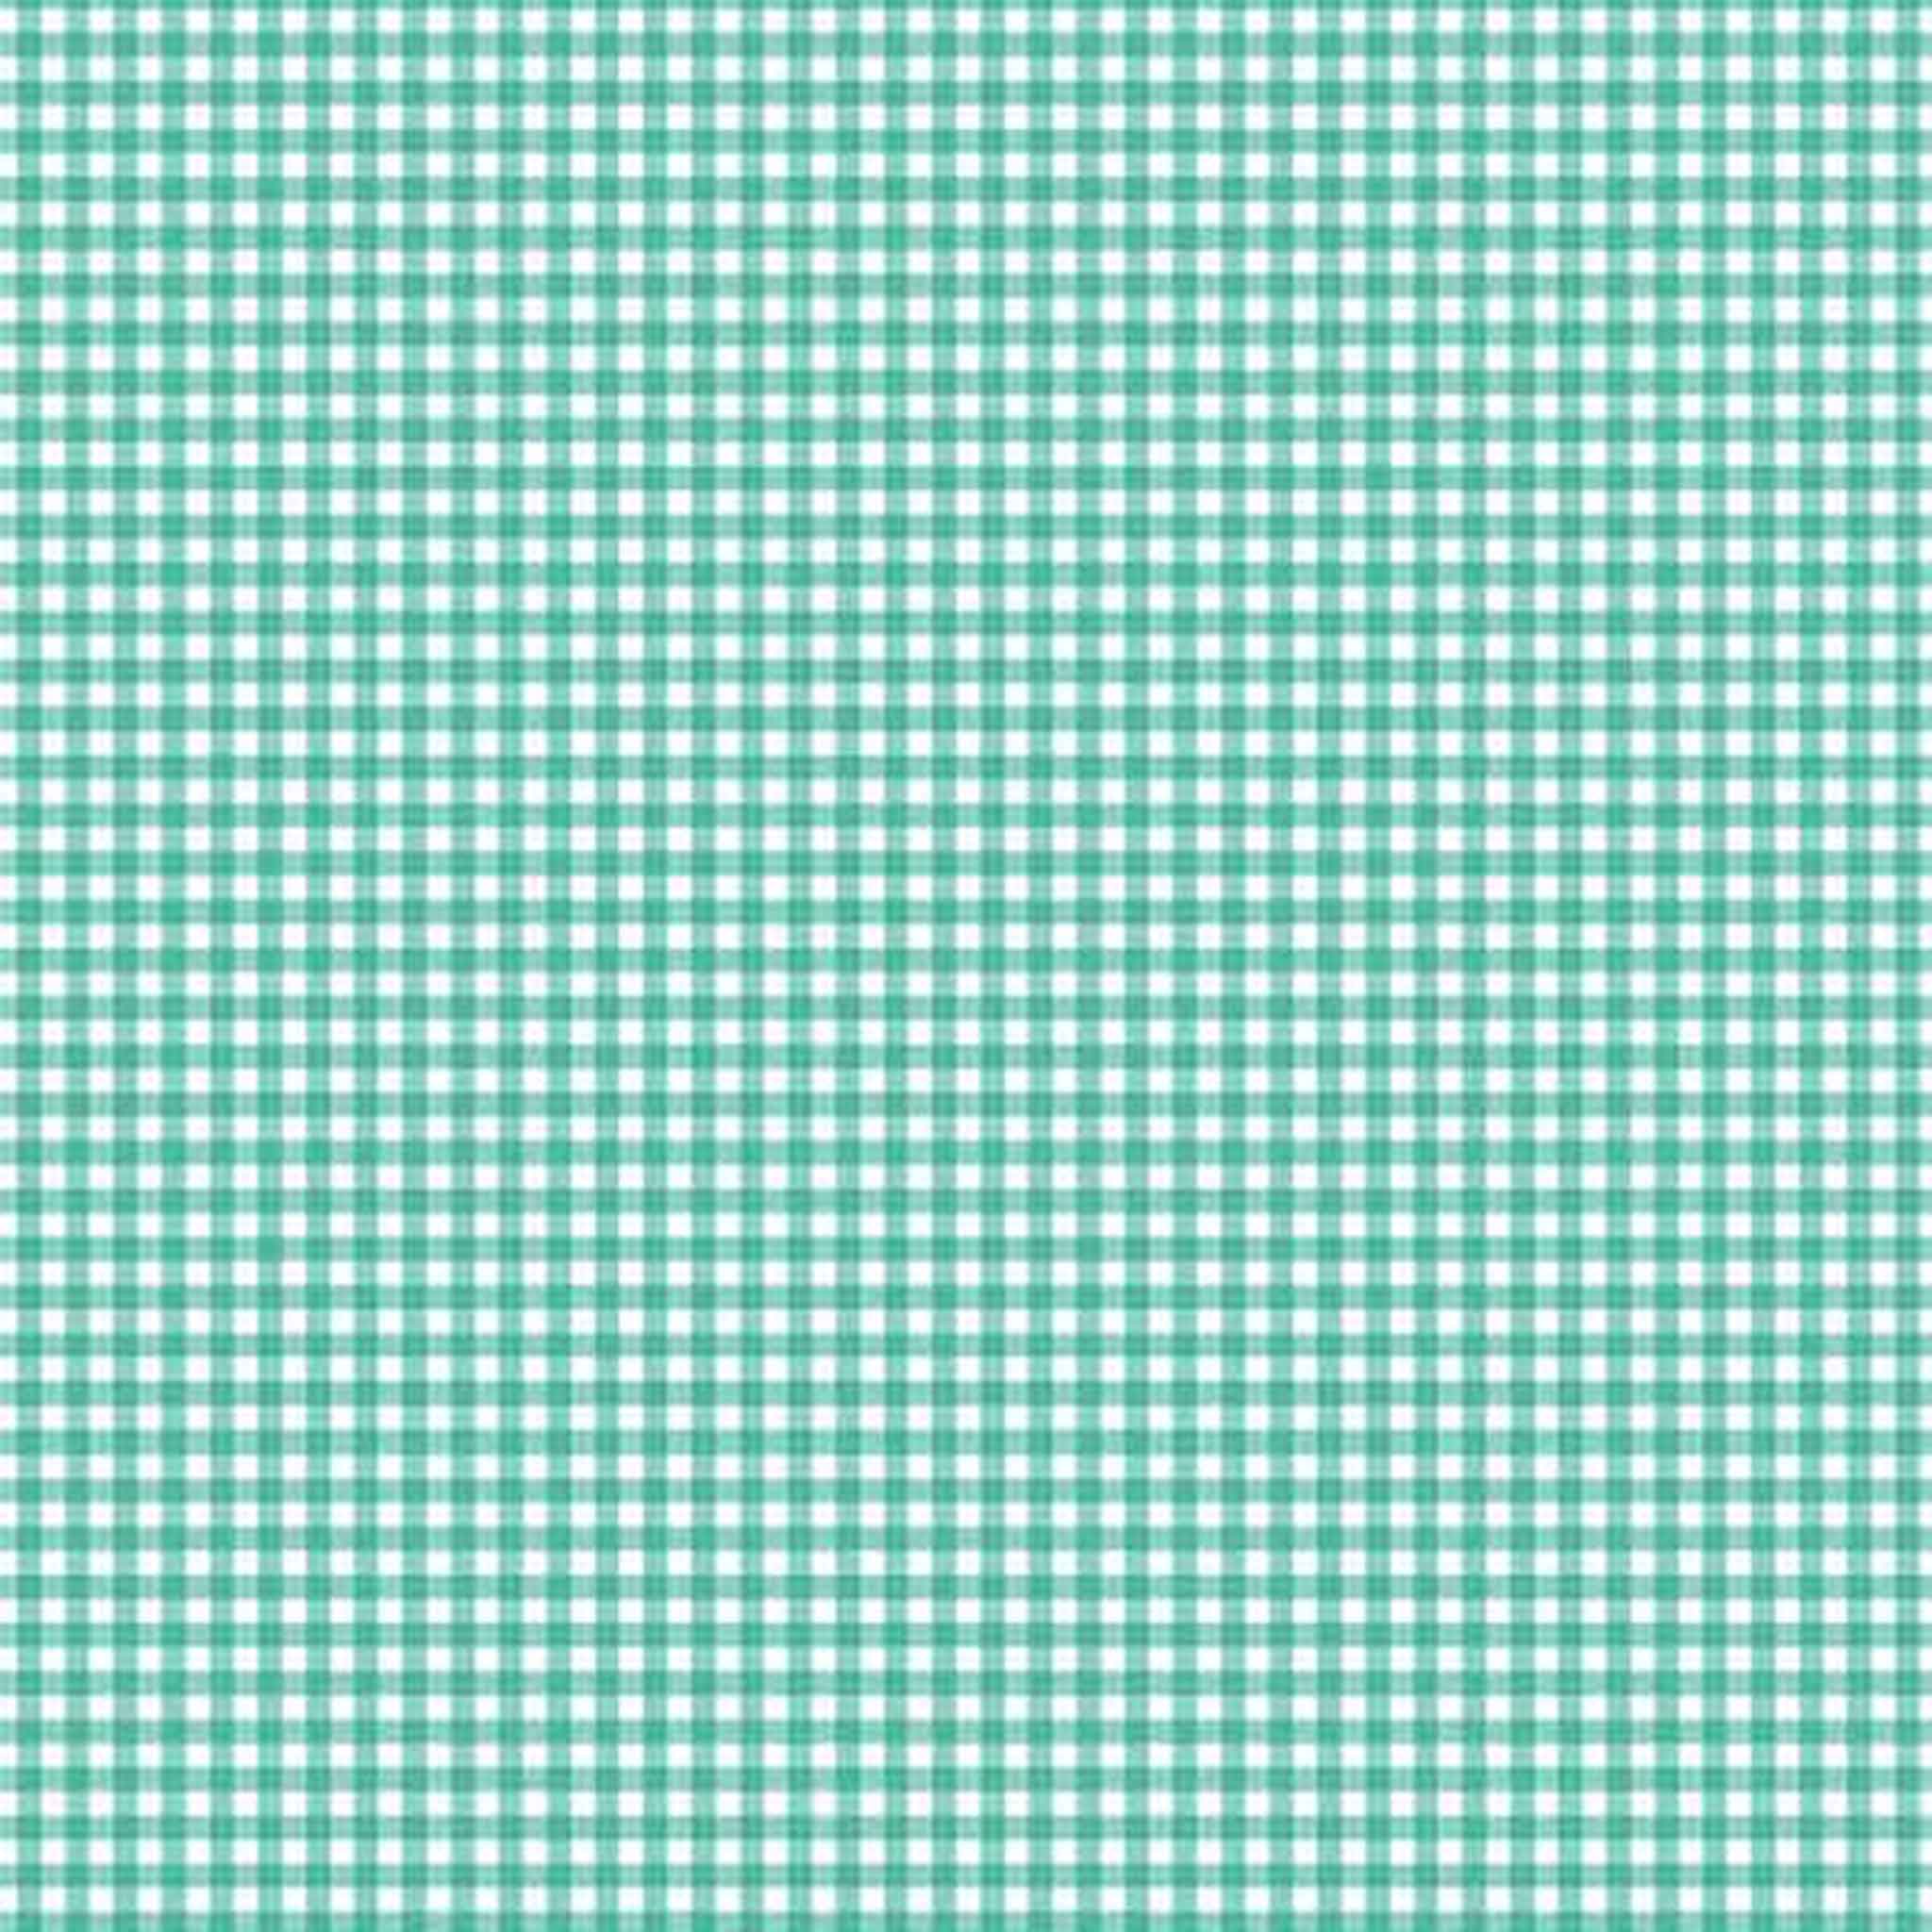 Teal Cotton Fabric by Makower 920/T6 Gingham Basics Collection